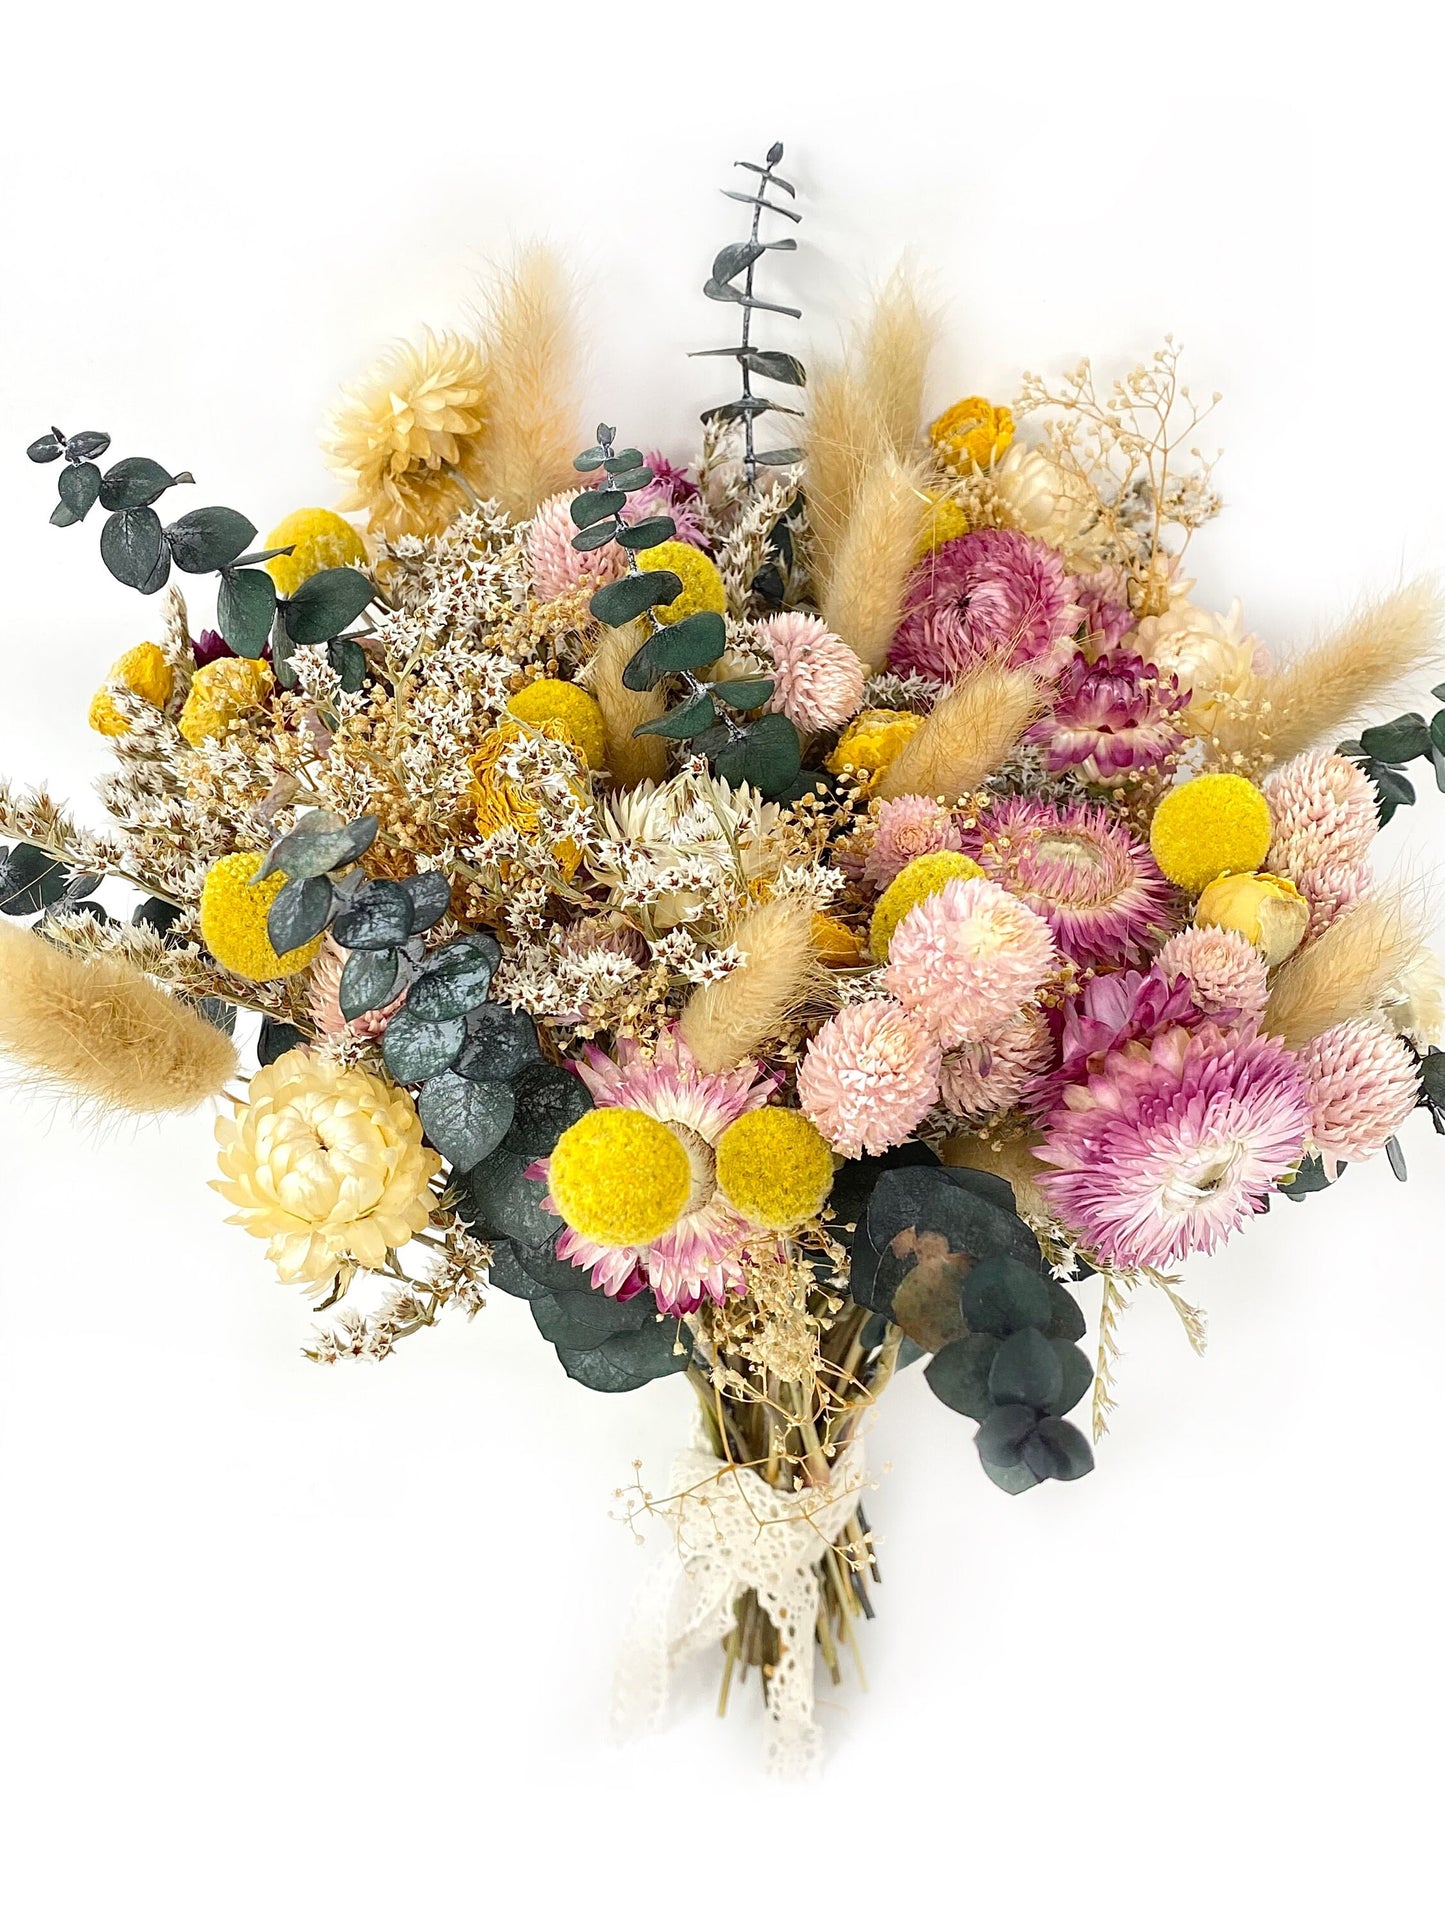 Summer Bouquet, Wedding Flowers, Dried Florals, Pink and Yellow, Throw Bouquet, Majestic, Light colors, Spring, Bridal, Anniversary